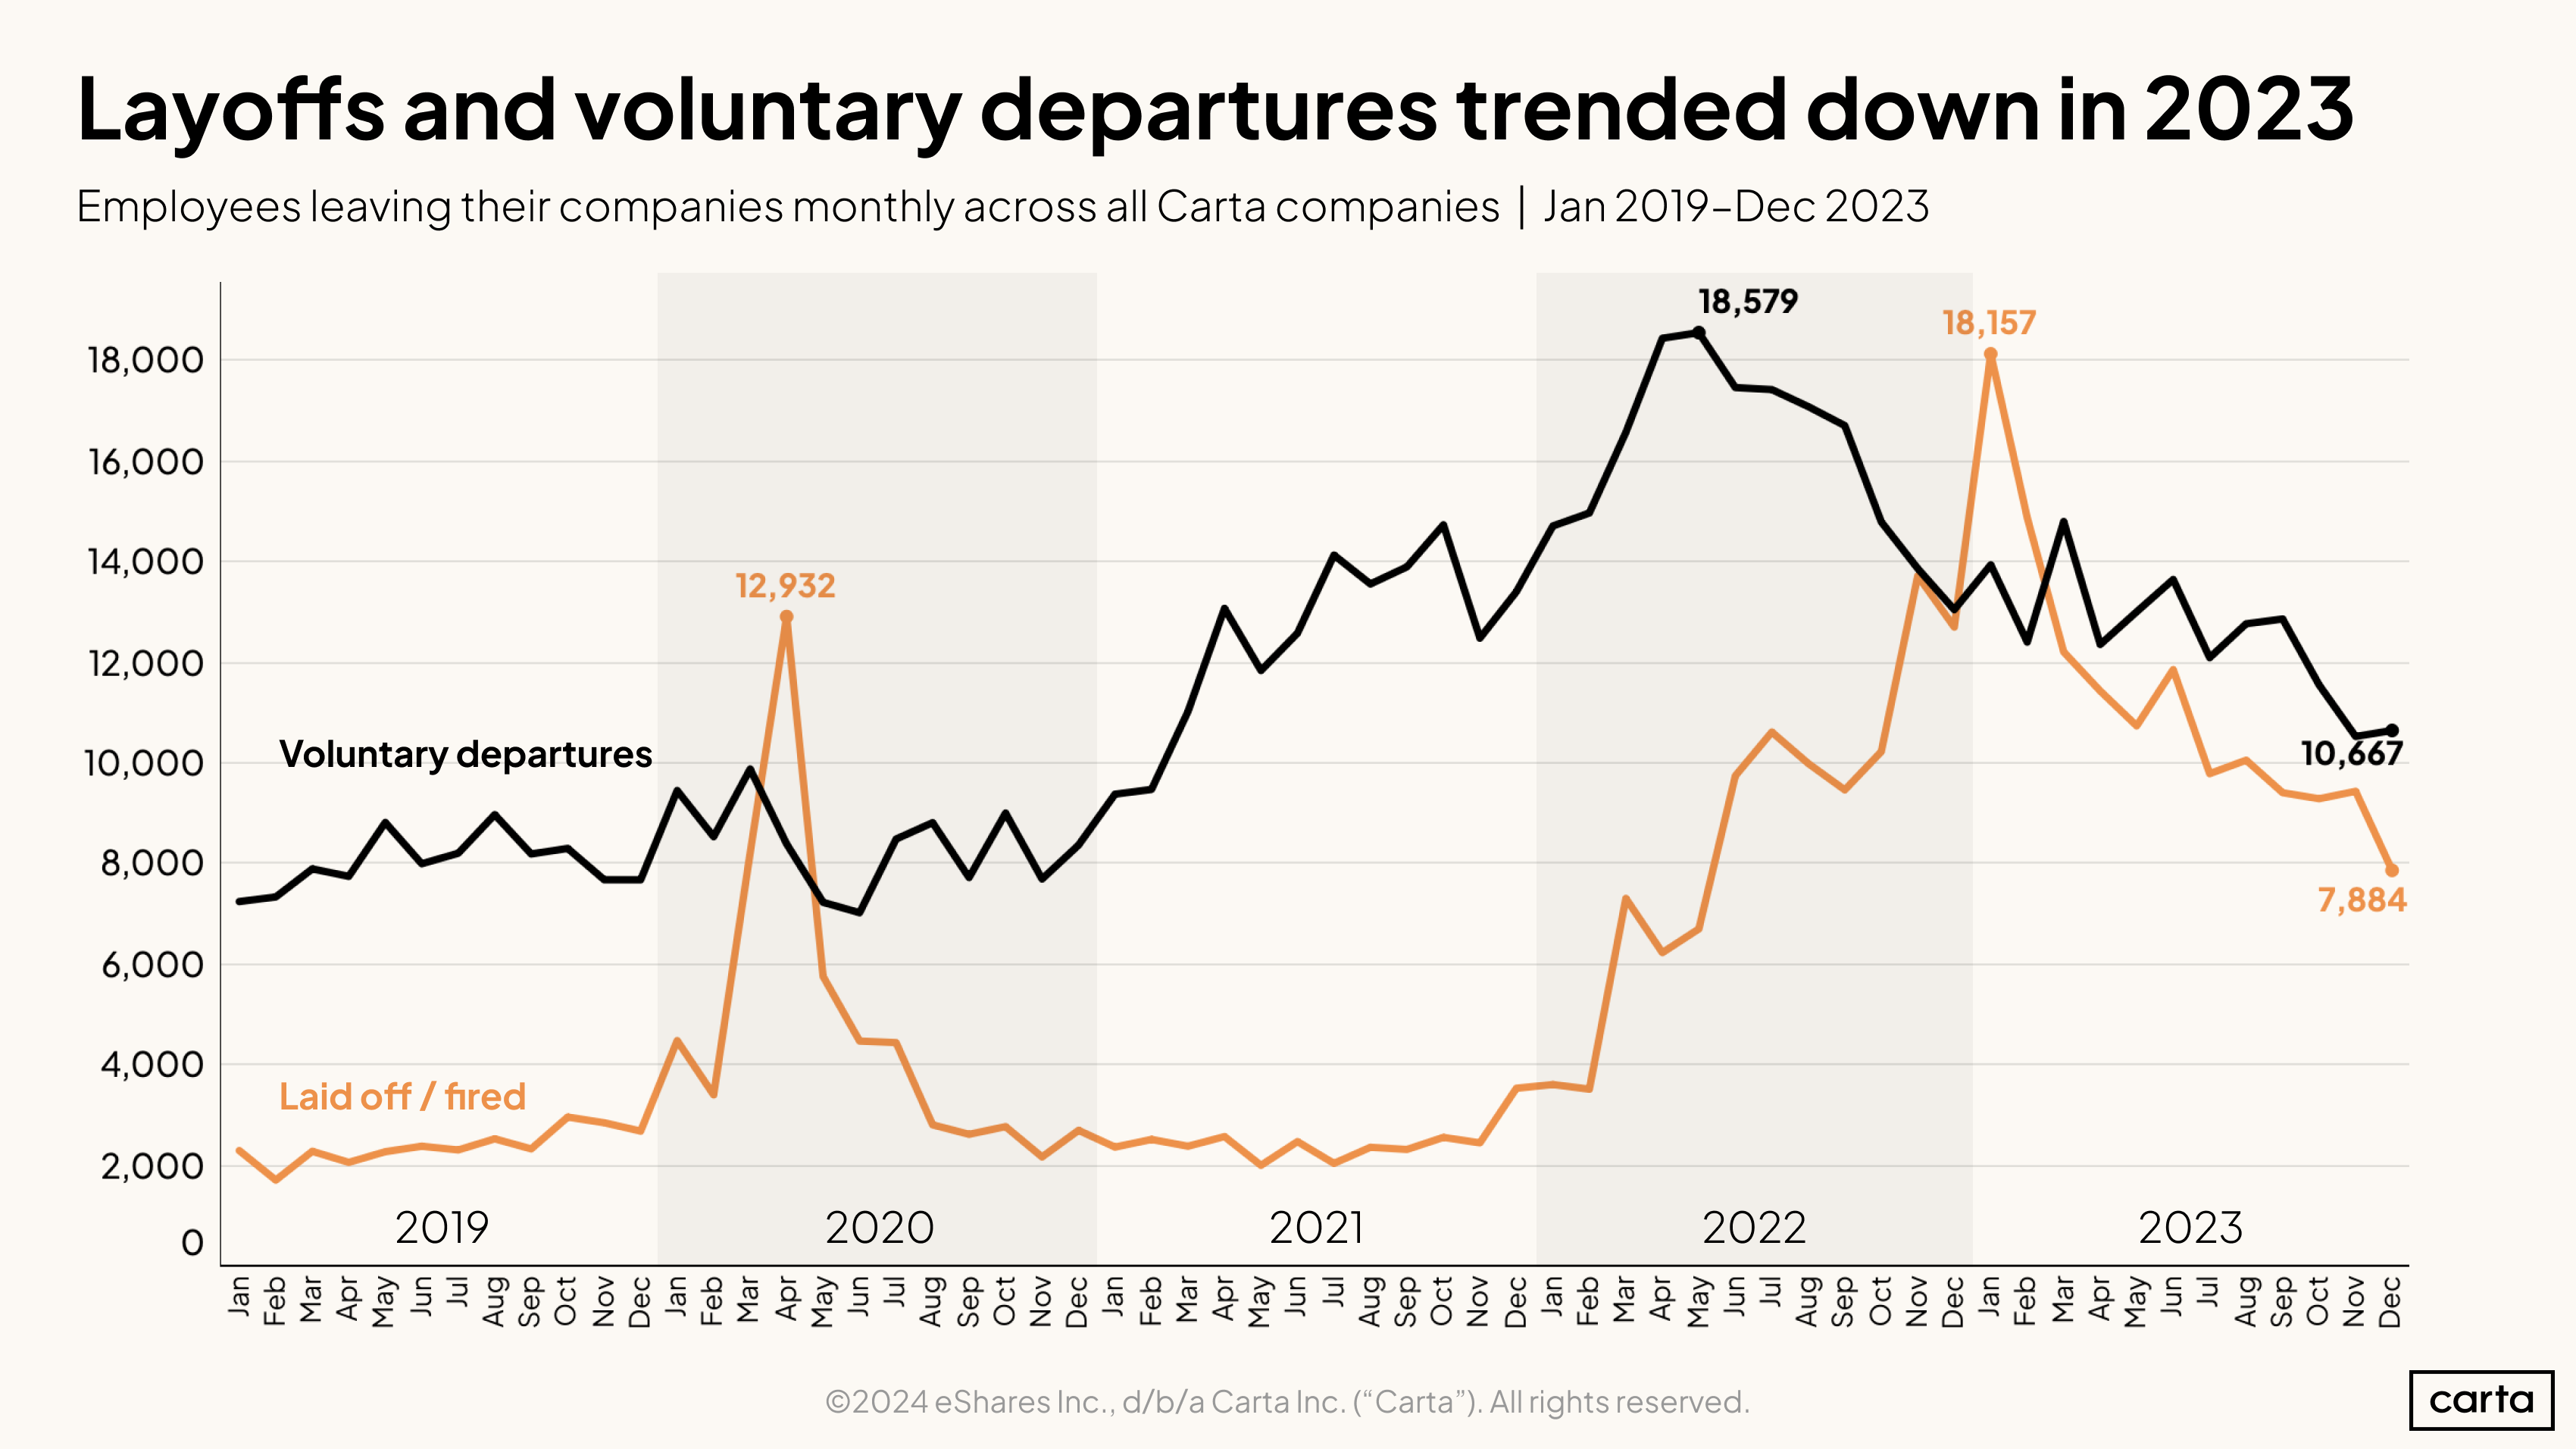 Layoffs and voluntary departures trended down in 2023